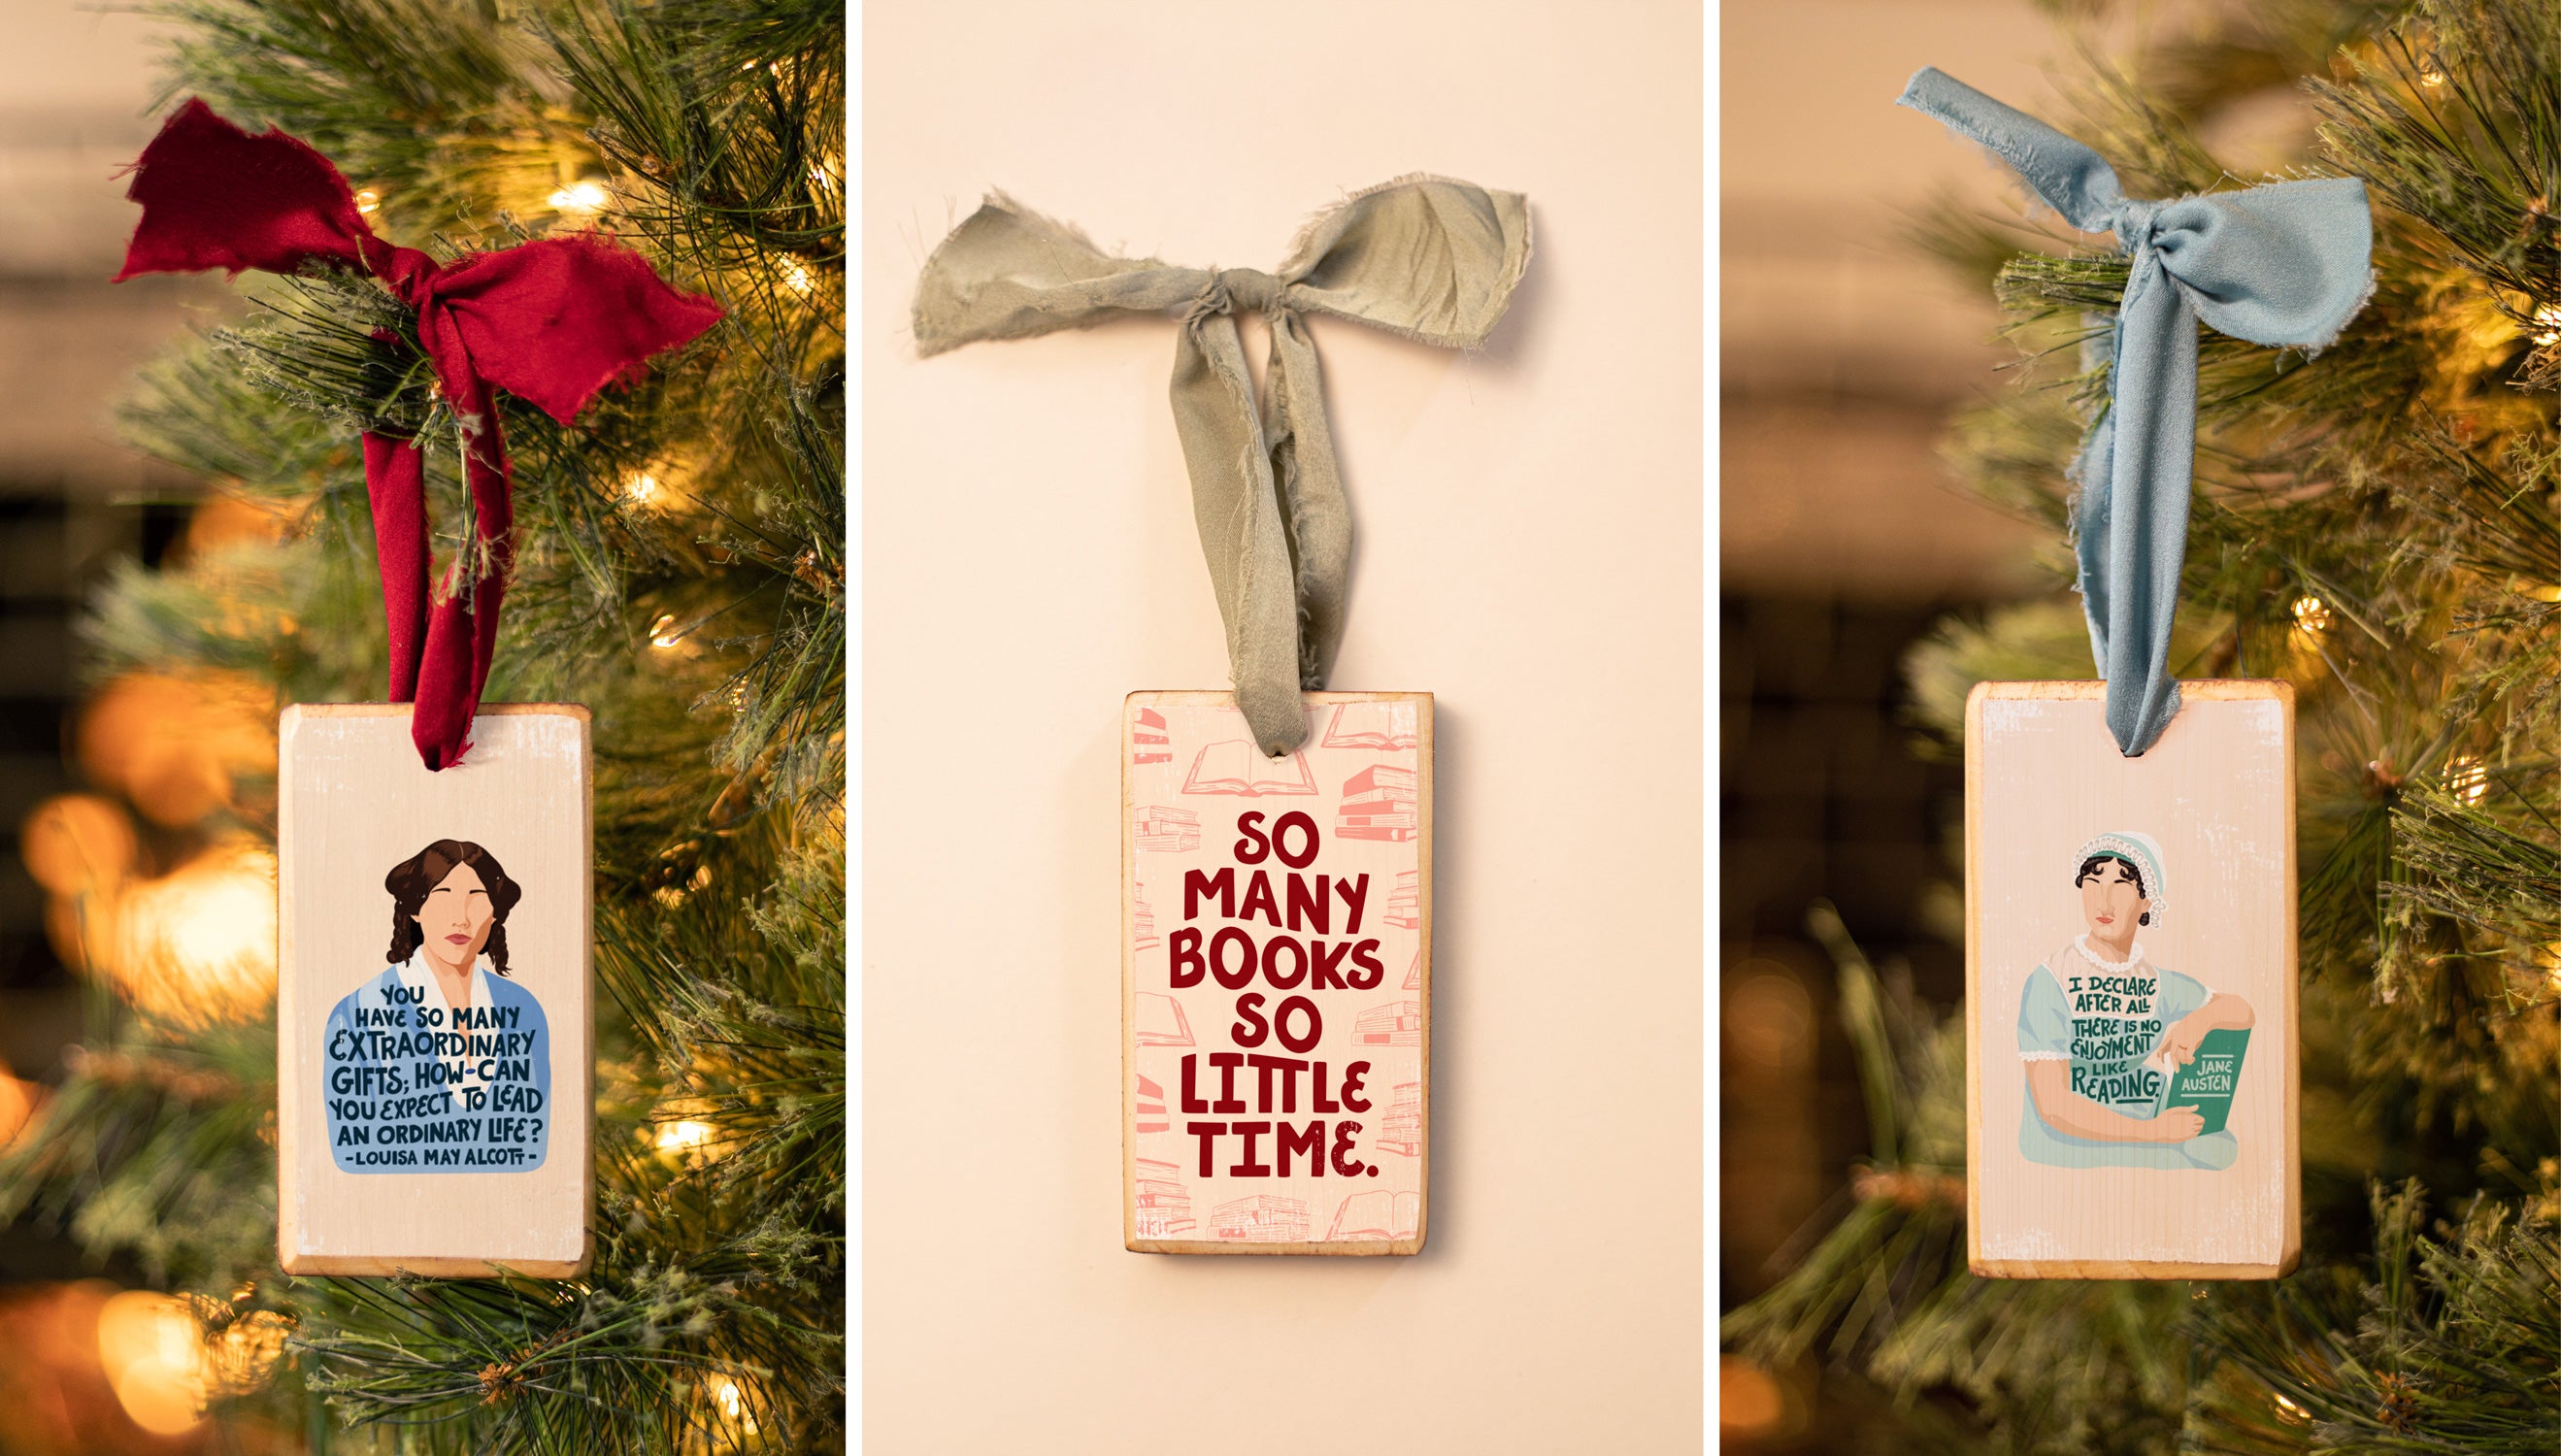 Christmas ornaments for classic literature readers and book lovers featuring Louisa May Alcott and Jane Austen and quotes from little Women and Price and Prejudice